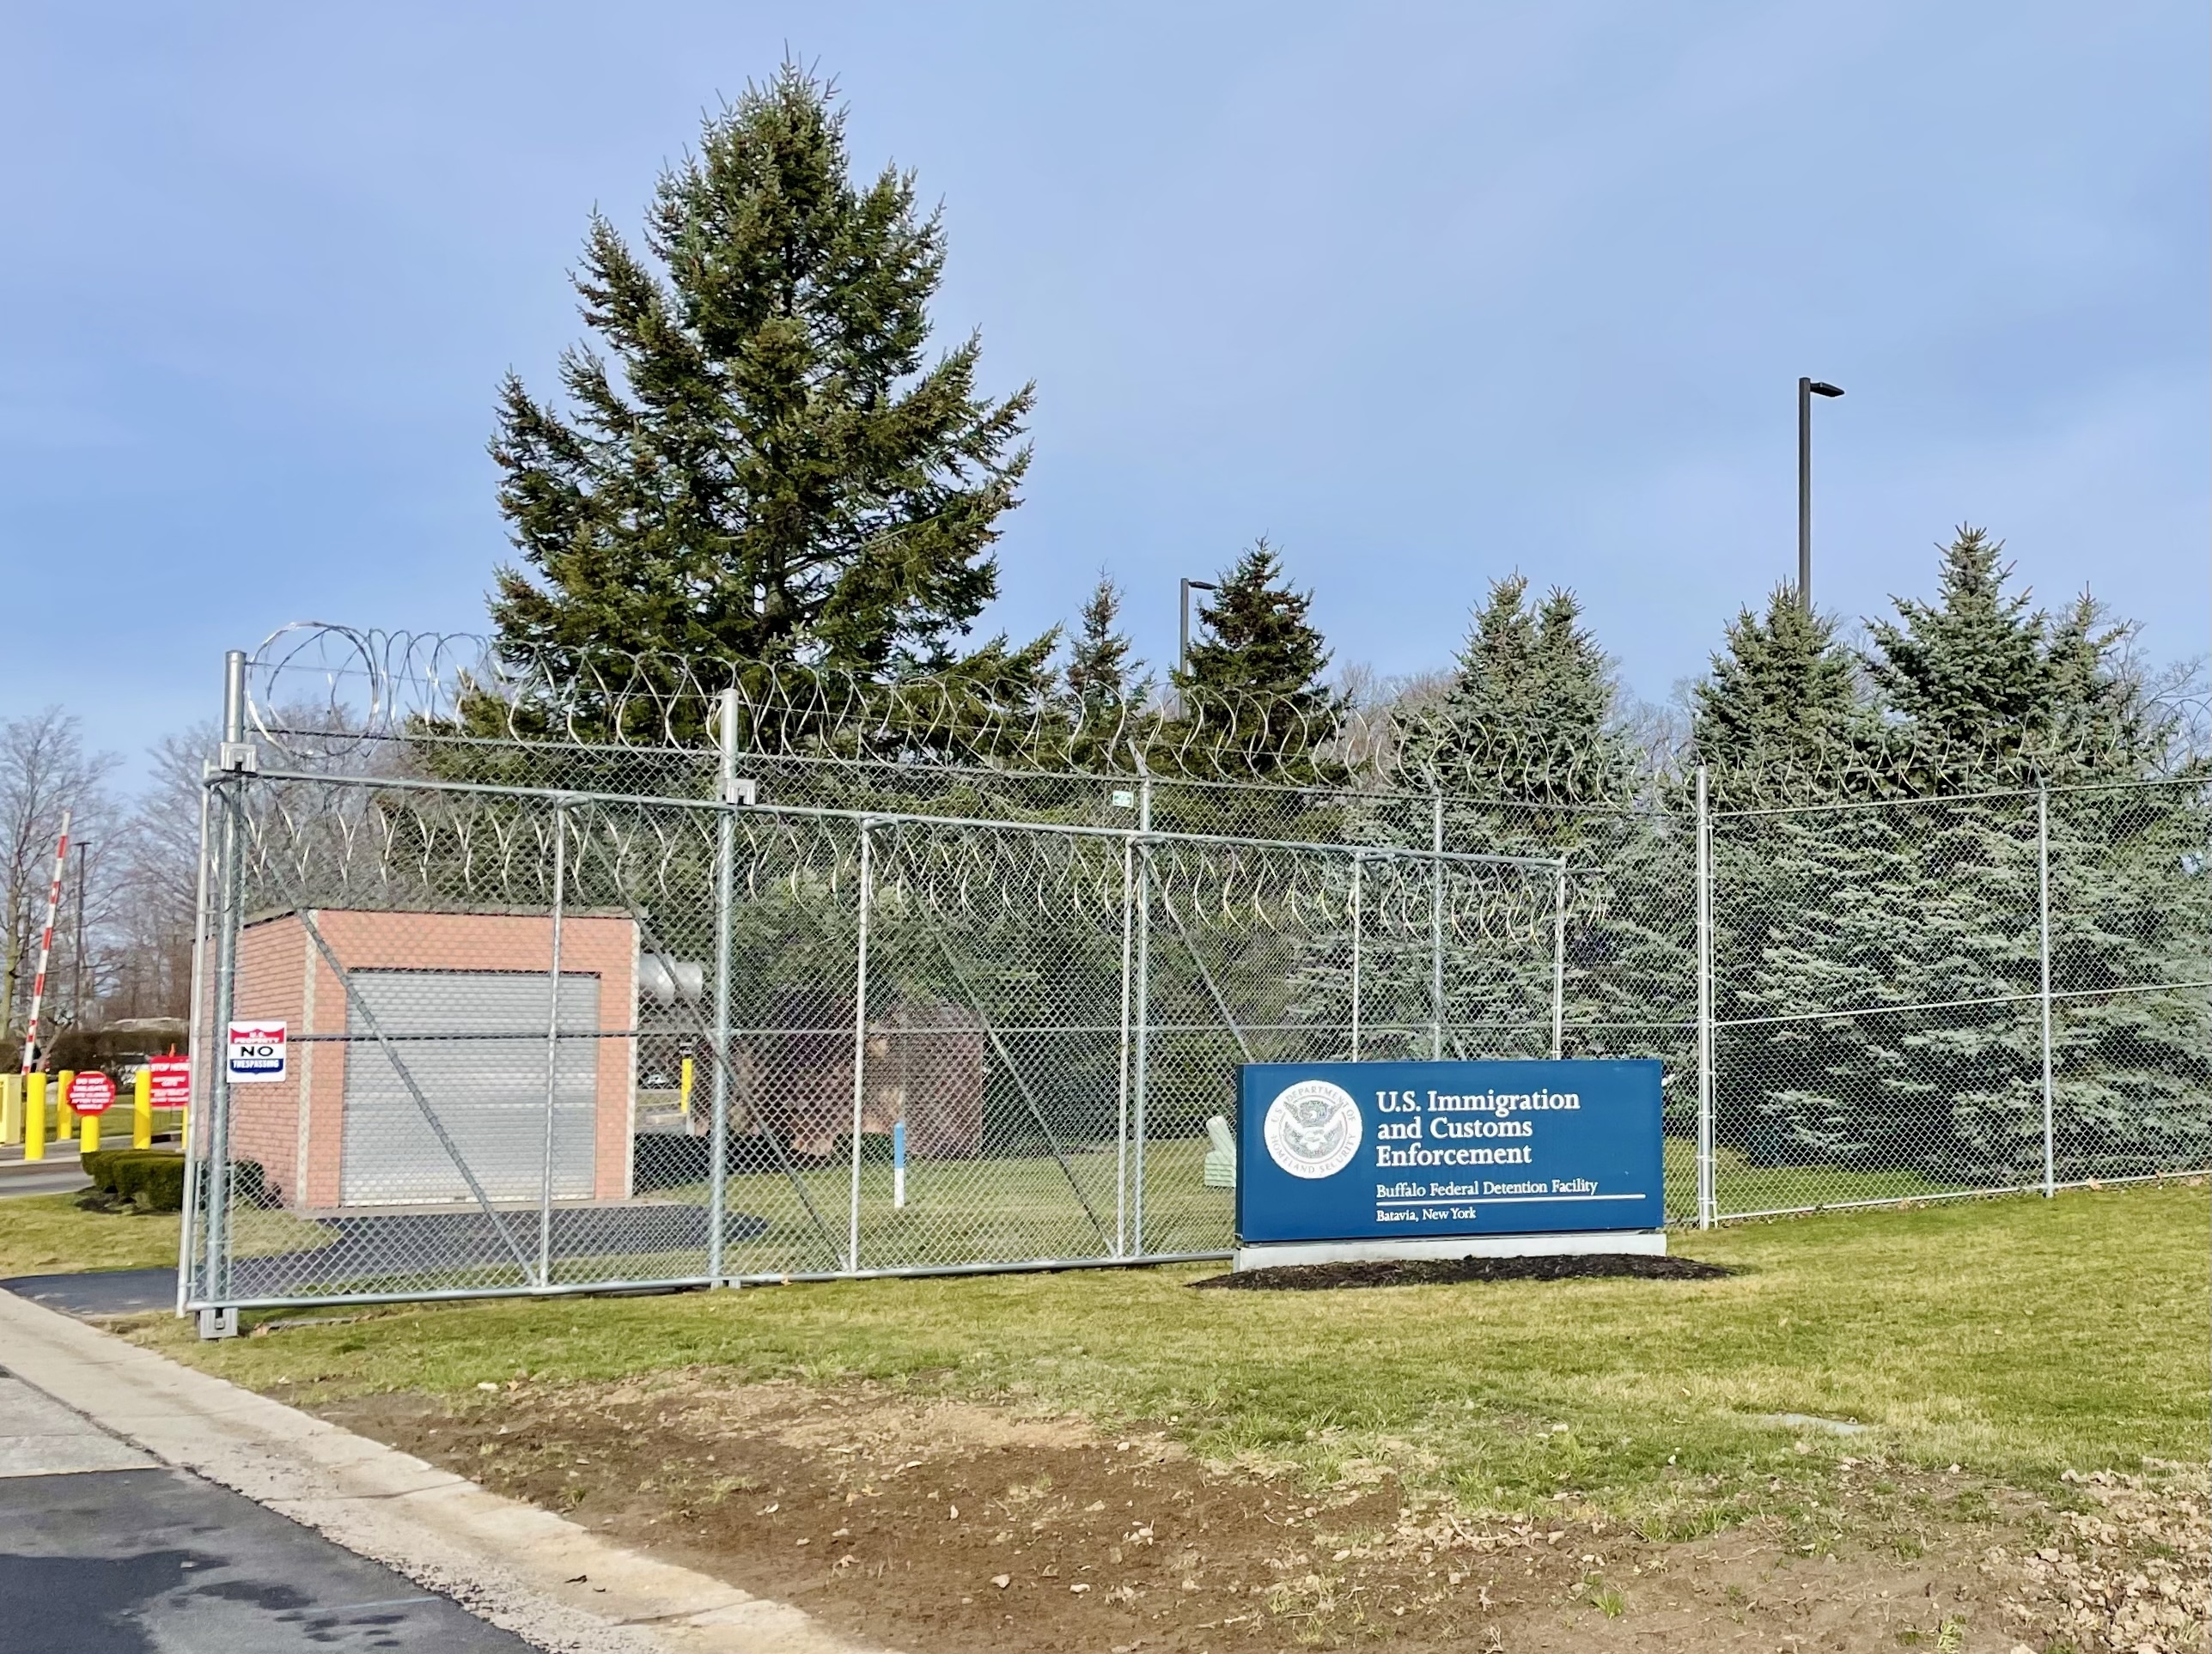 entrance to the Buffalo Federal Detention Facility in Batavia, New York